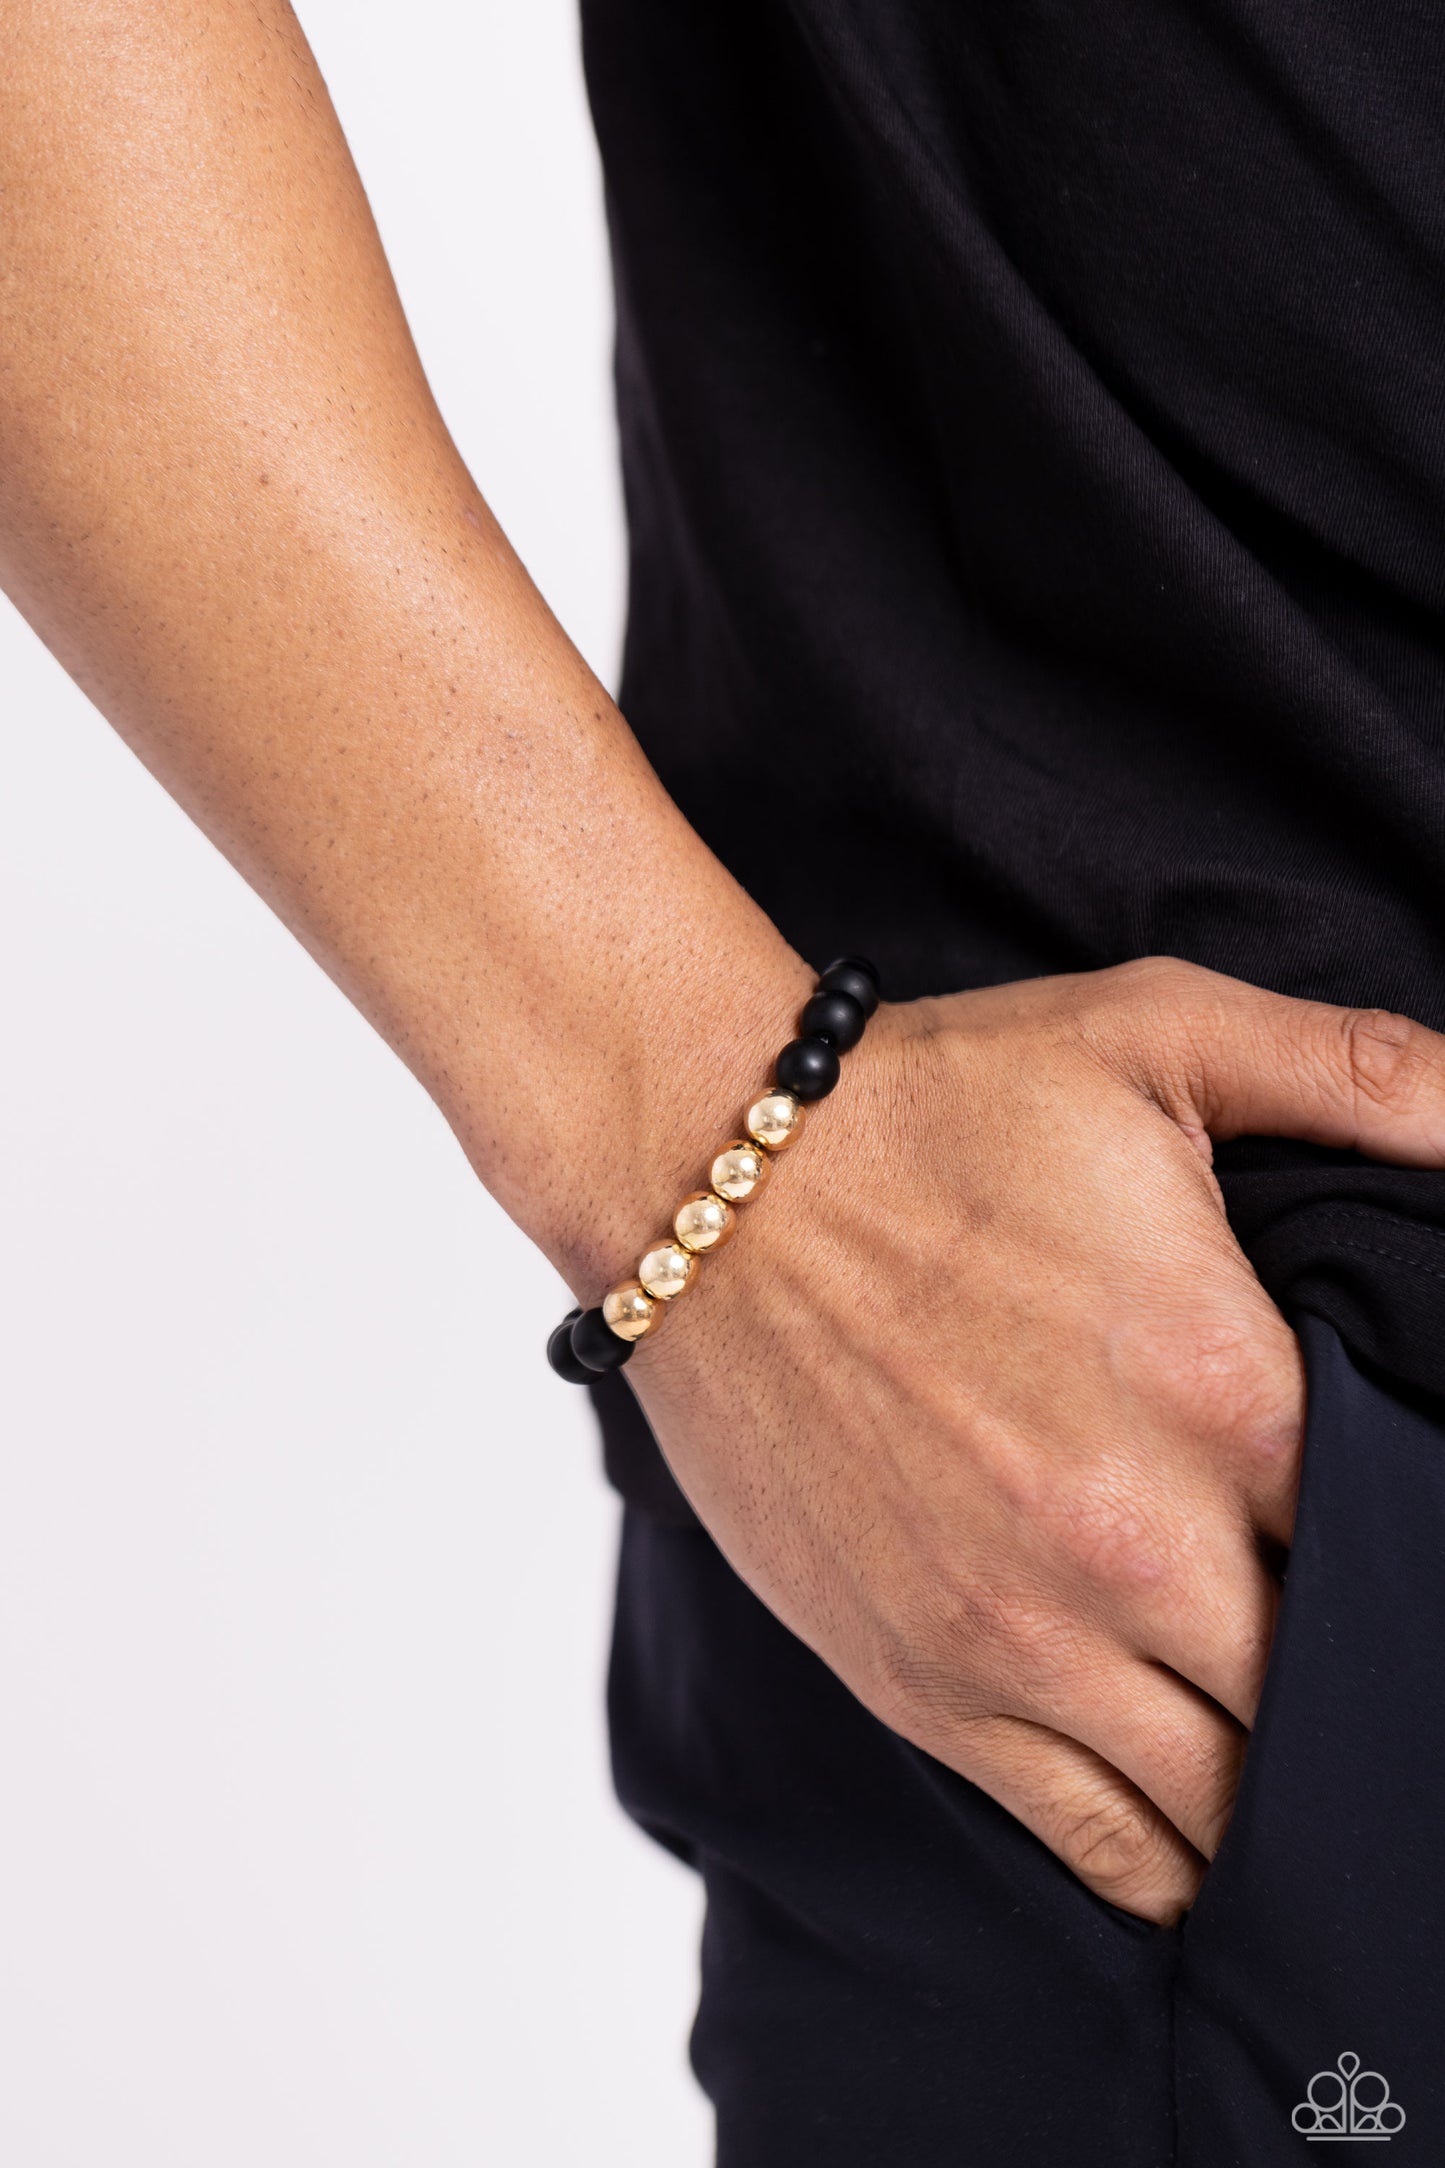 METALHEAD in the Clouds Gold Unisex Bracelet - Paparazzi Accessories  A section of gold beads joins polished black stone beads along stretchy bands around the wrist, resulting in a metallic edge.  Sold as one individual bracelet.  P9SE-URGD-033XX